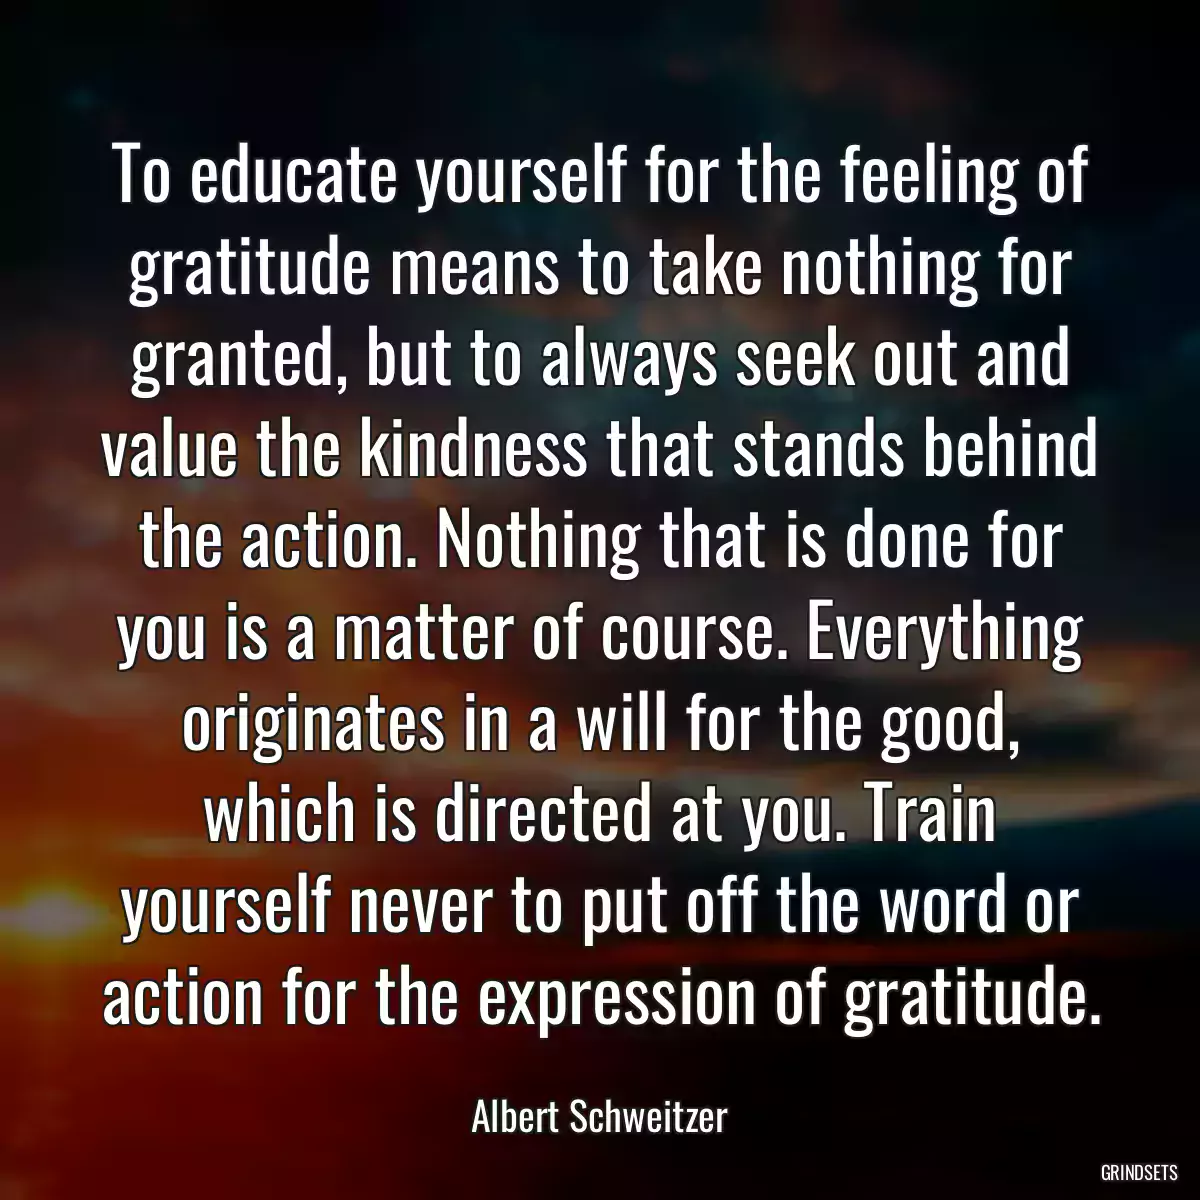 To educate yourself for the feeling of gratitude means to take nothing for granted, but to always seek out and value the kindness that stands behind the action. Nothing that is done for you is a matter of course. Everything originates in a will for the good, which is directed at you. Train yourself never to put off the word or action for the expression of gratitude.